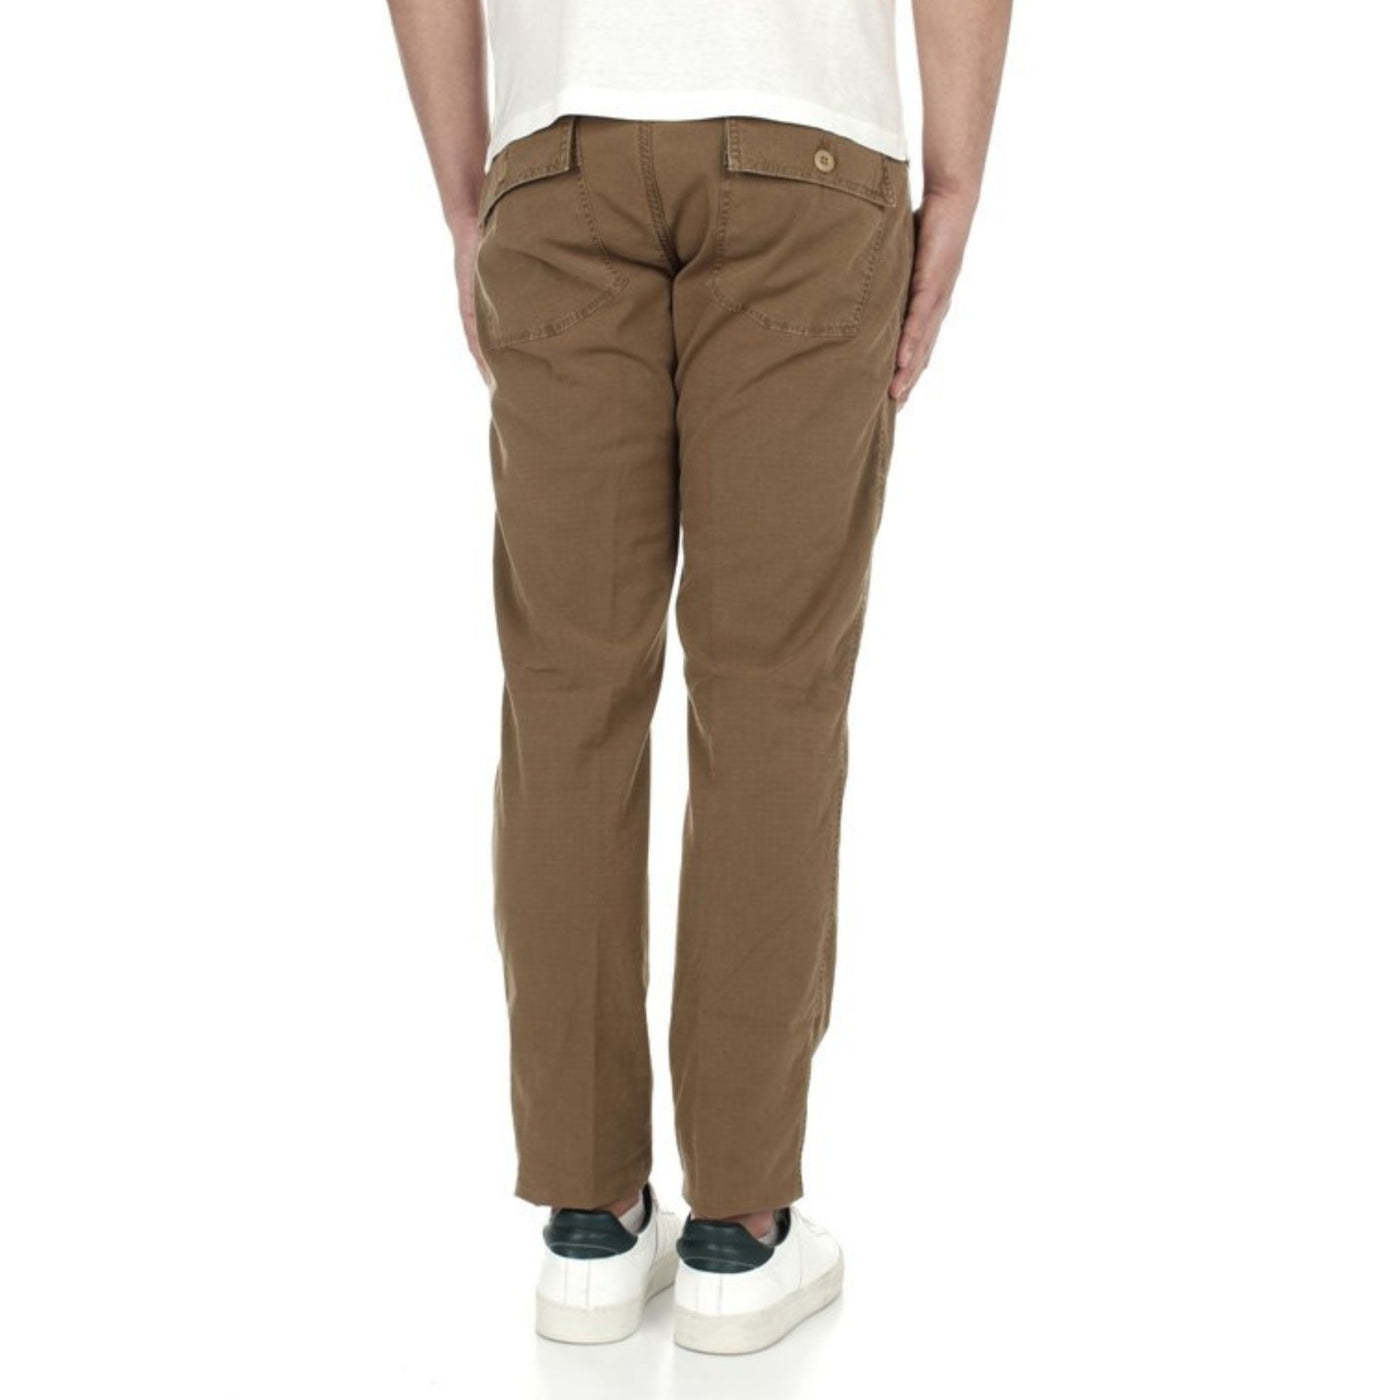 Men's trousers with solid color pockets